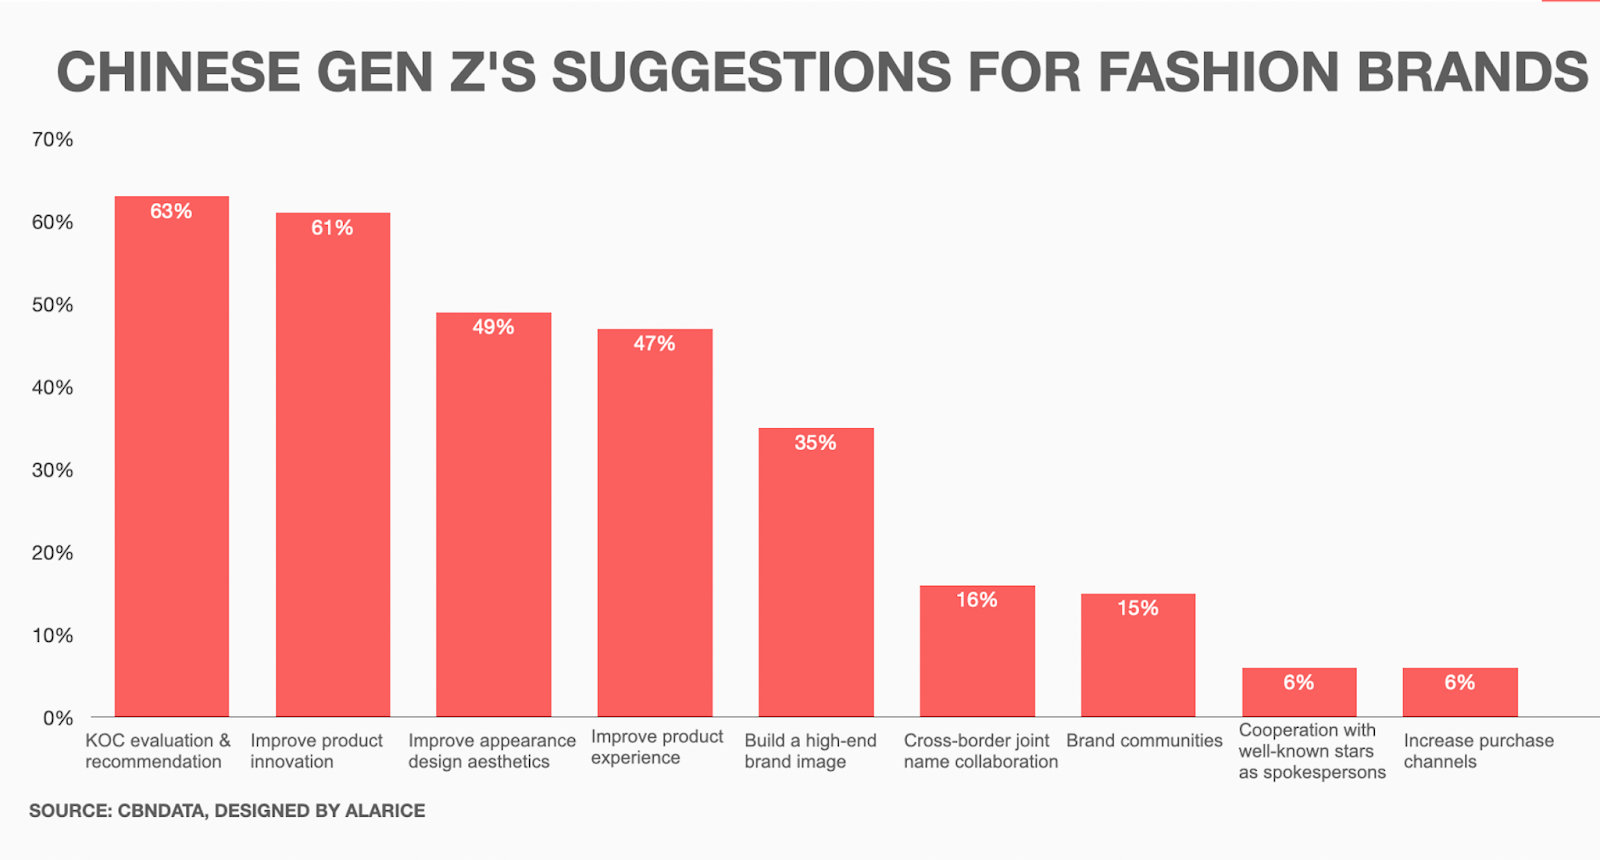 GenZ's suggestions for fashion brand